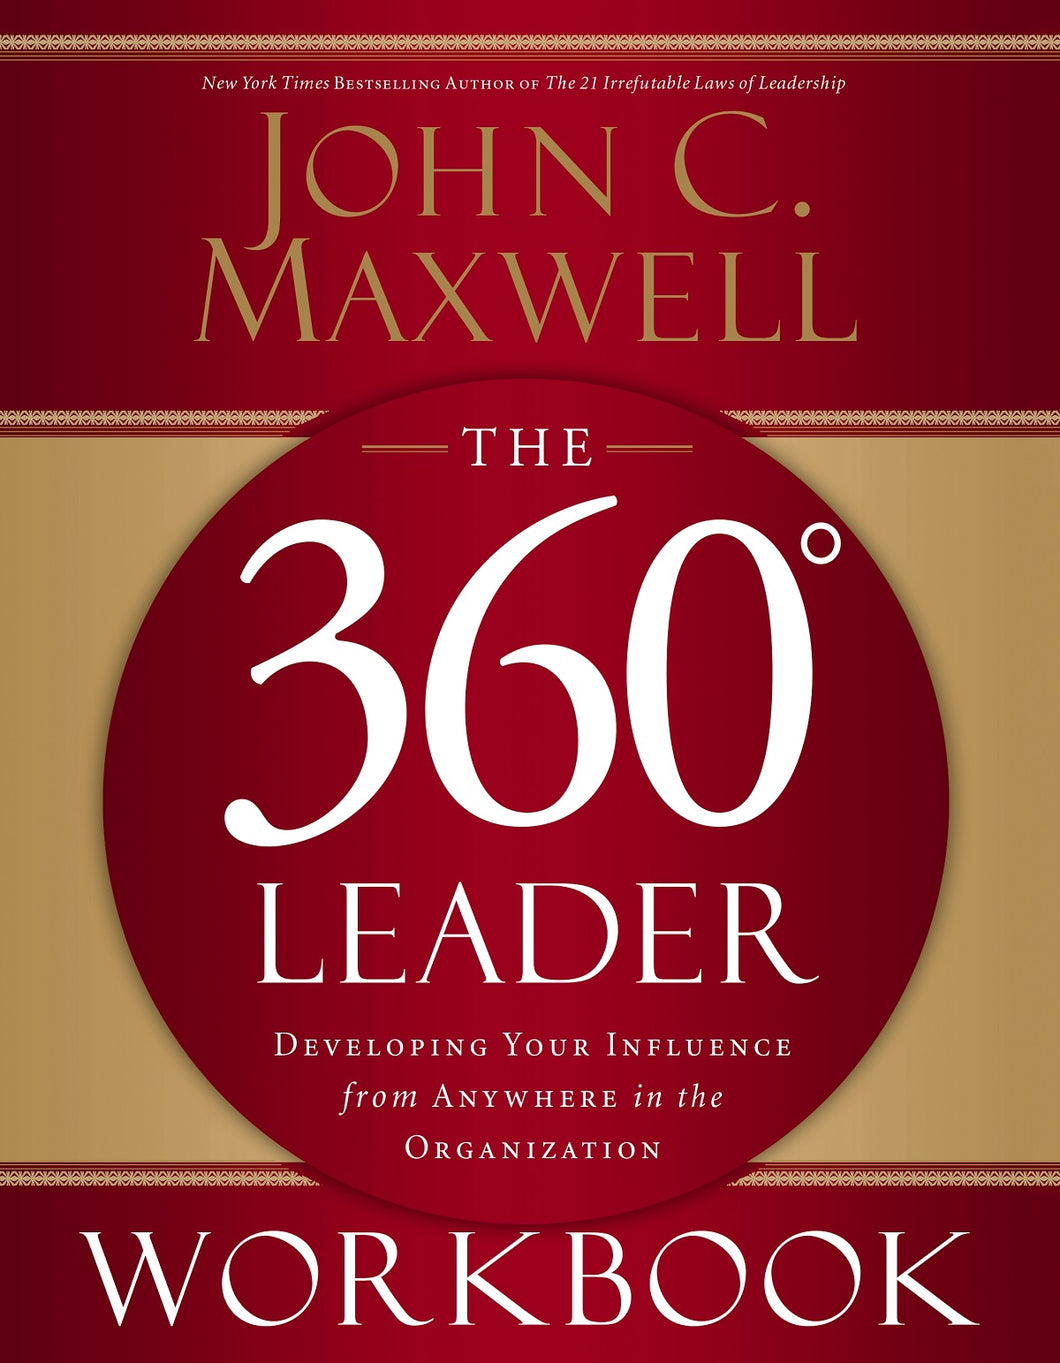 The 360 Degree Leader Workbook: Developing Your Influence from Anywhere in the Organization